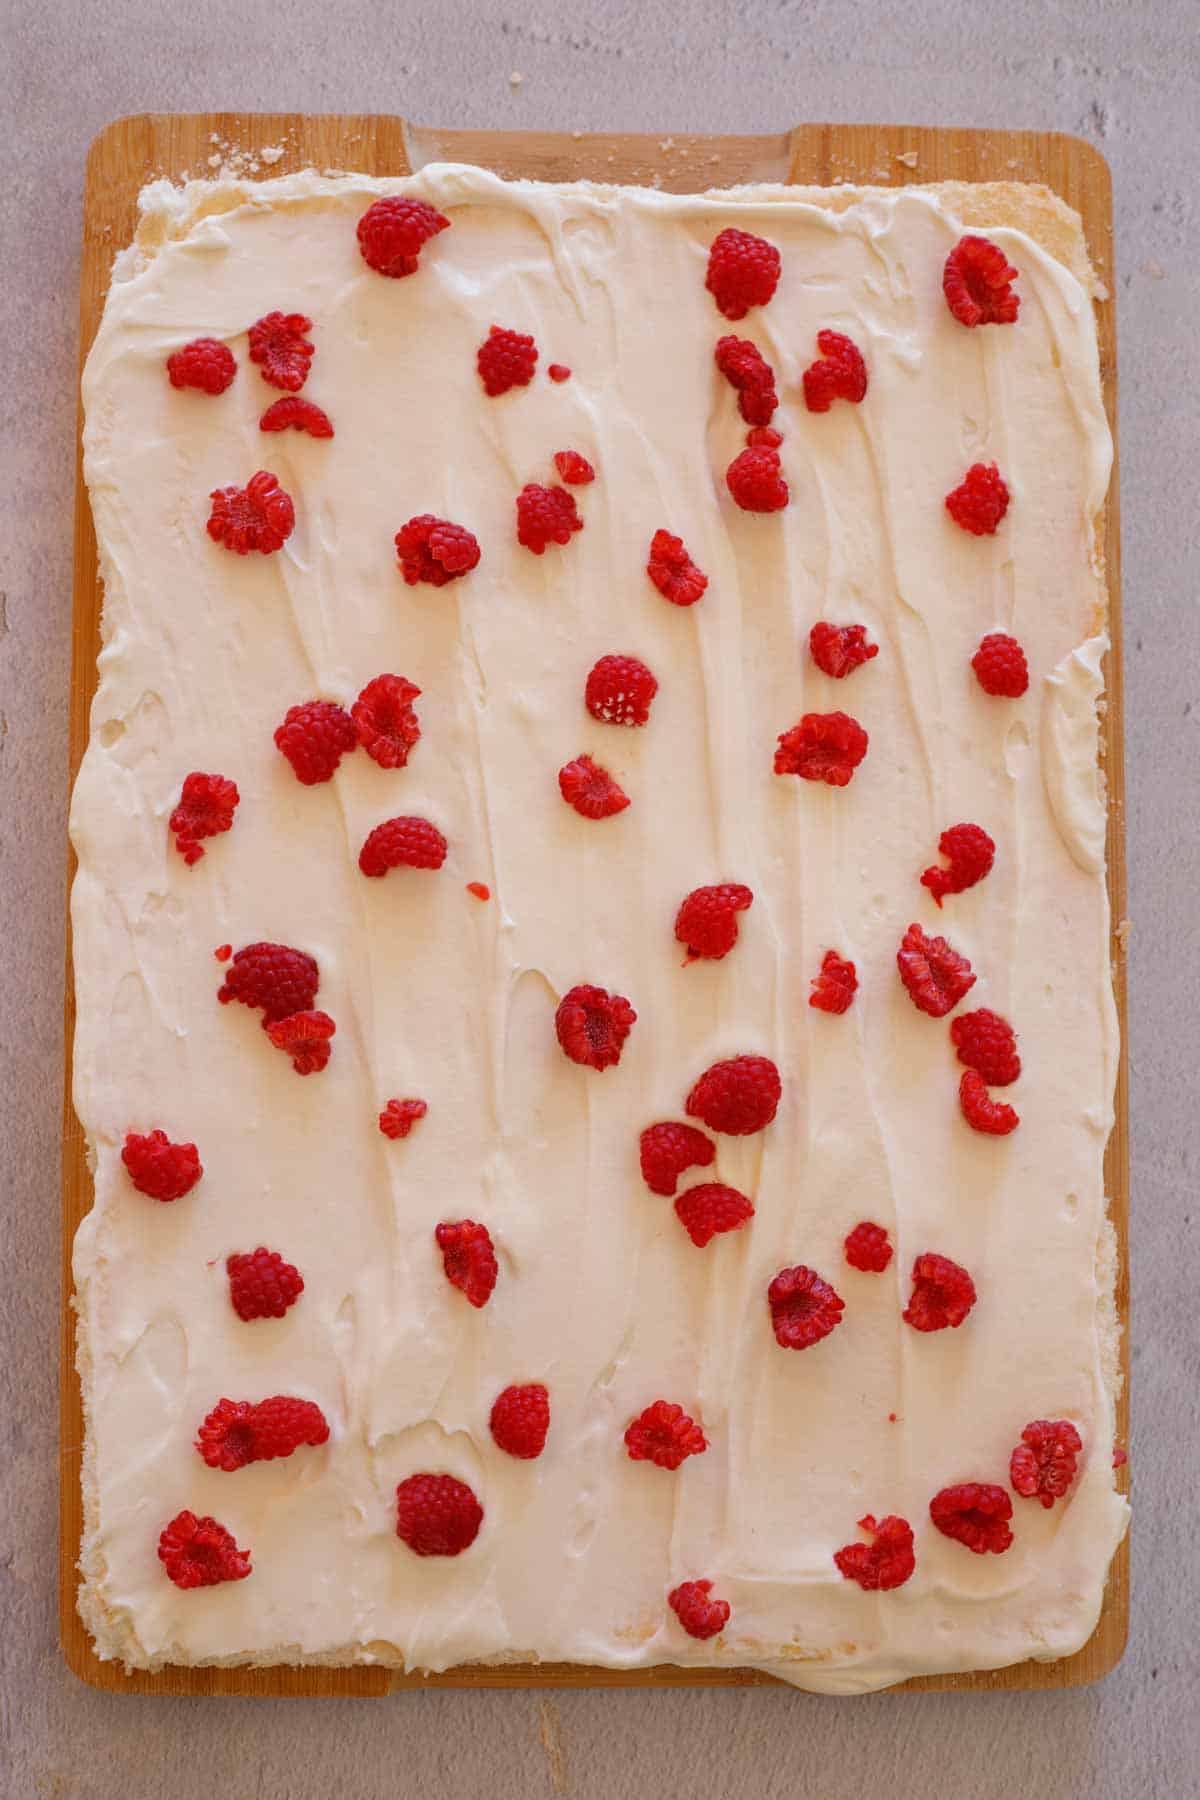 The cream evenly spread on the meringue along with raspberries. 